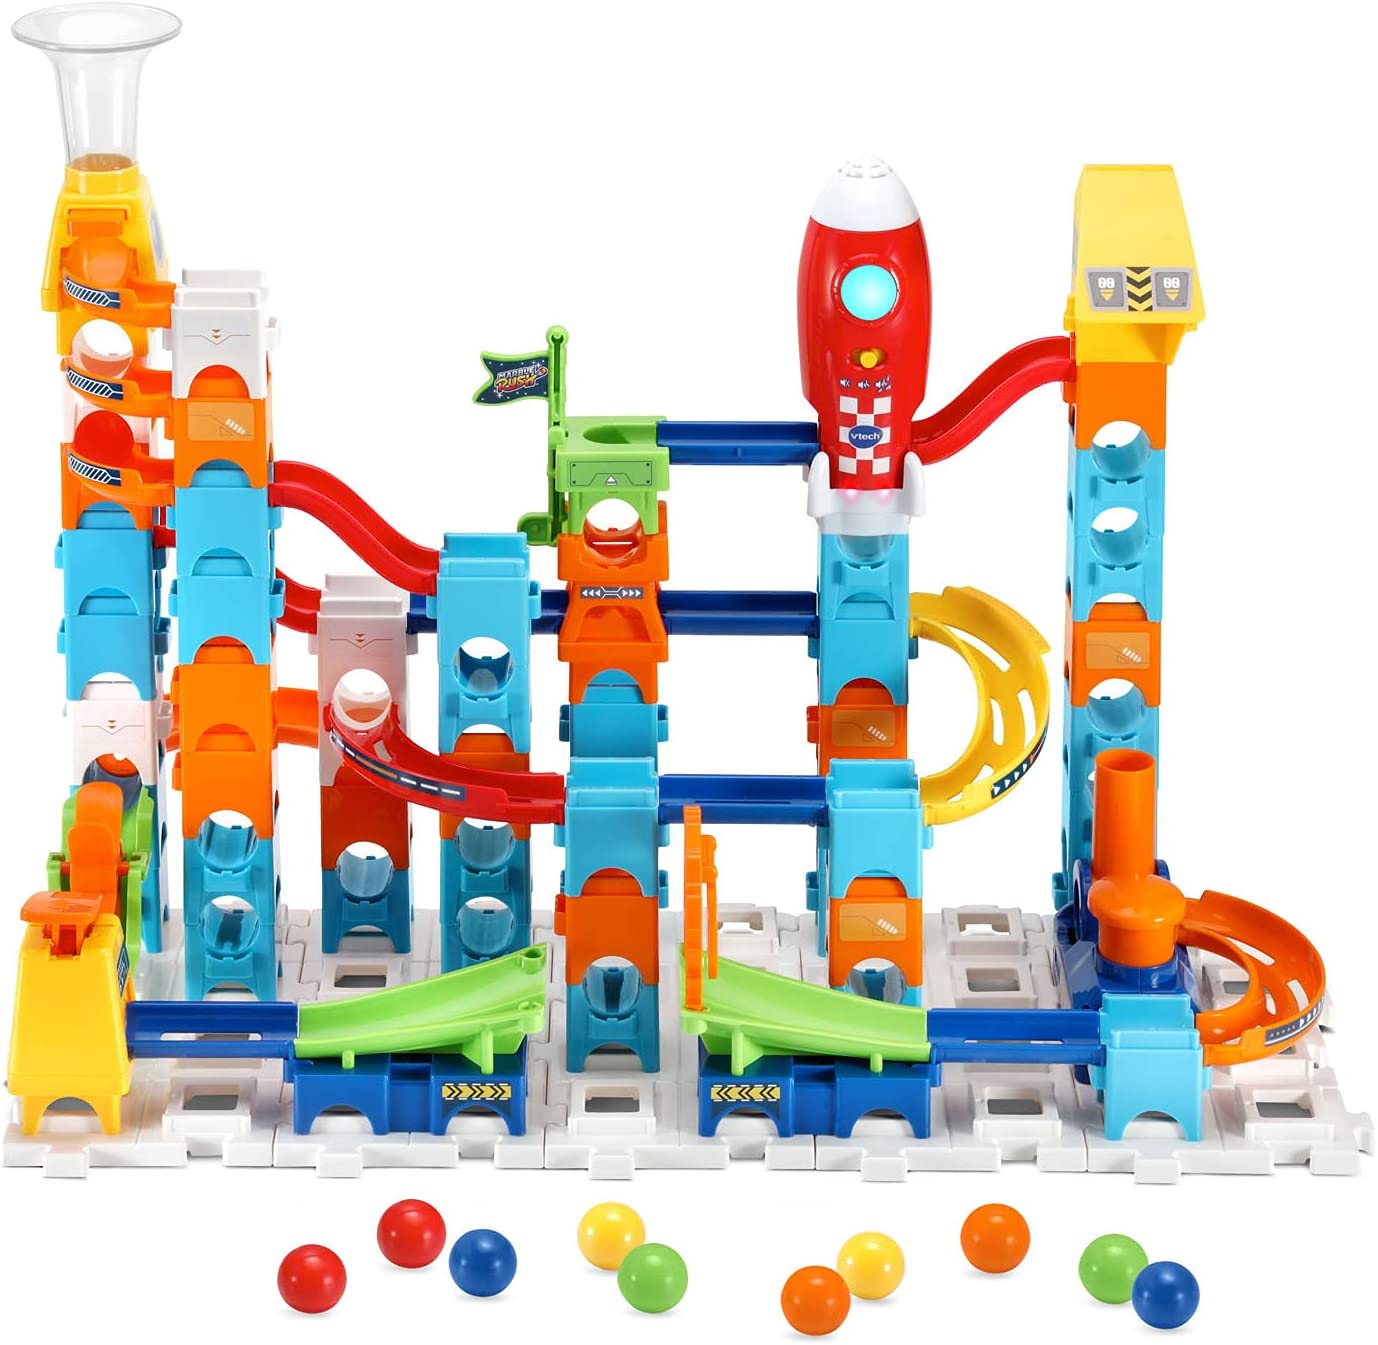 VTech Marble Rush Launchpad Set (Multicolor) $14.55 + Free S&H w/ Prime or $25+